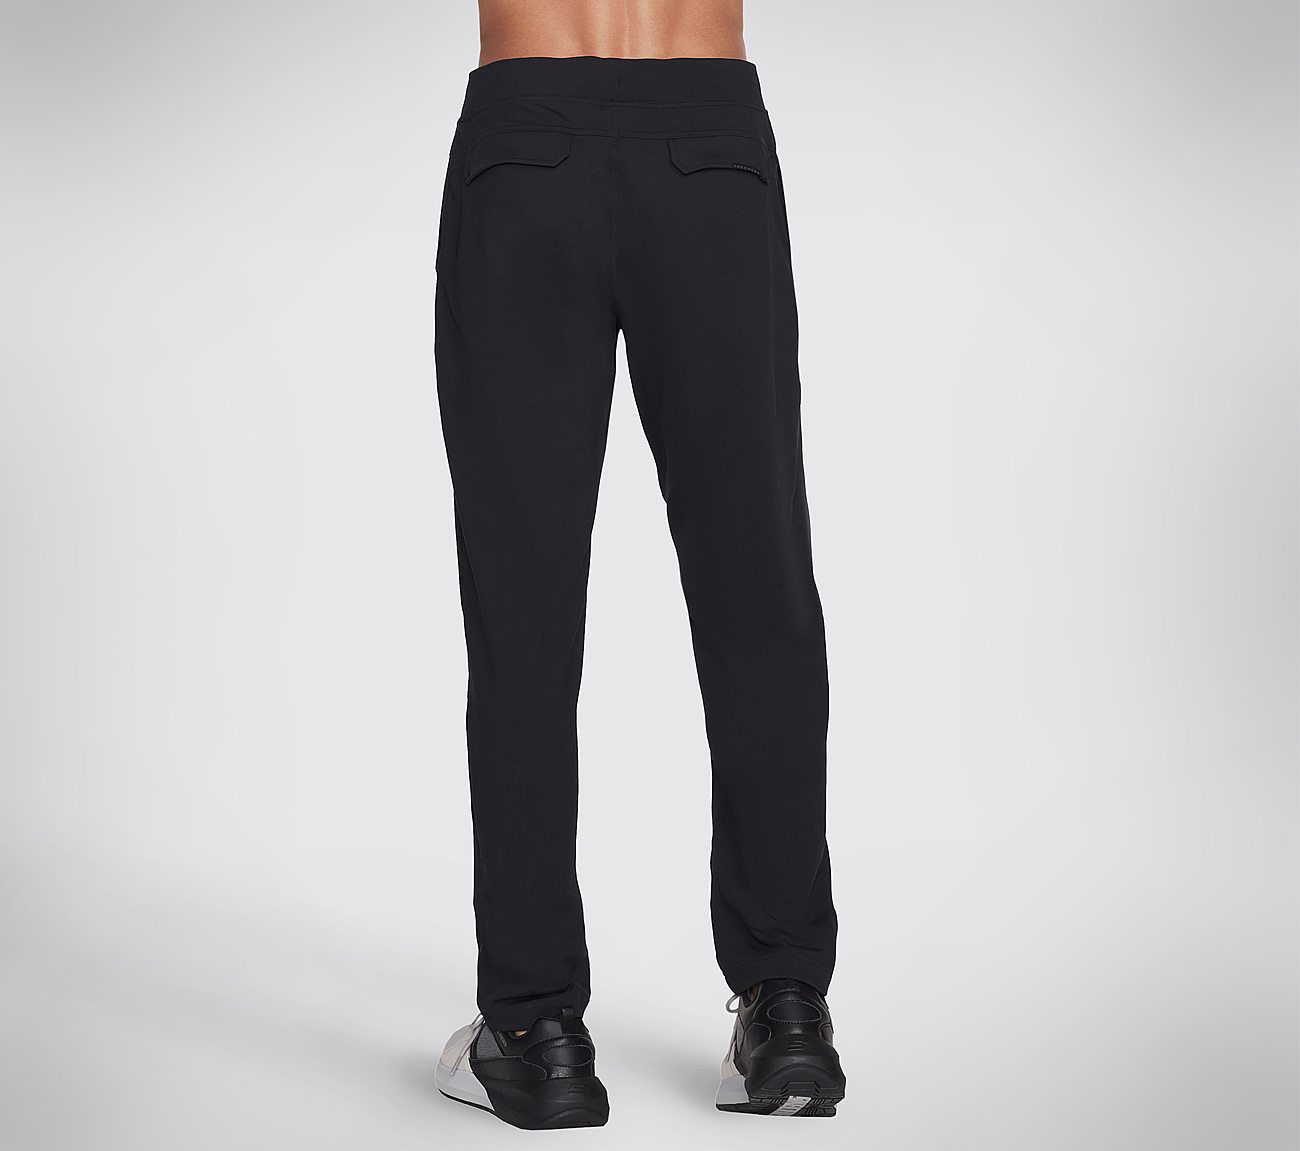 THE GOWALK PANT RECHARGE, BBBBLACK Apparels Top View